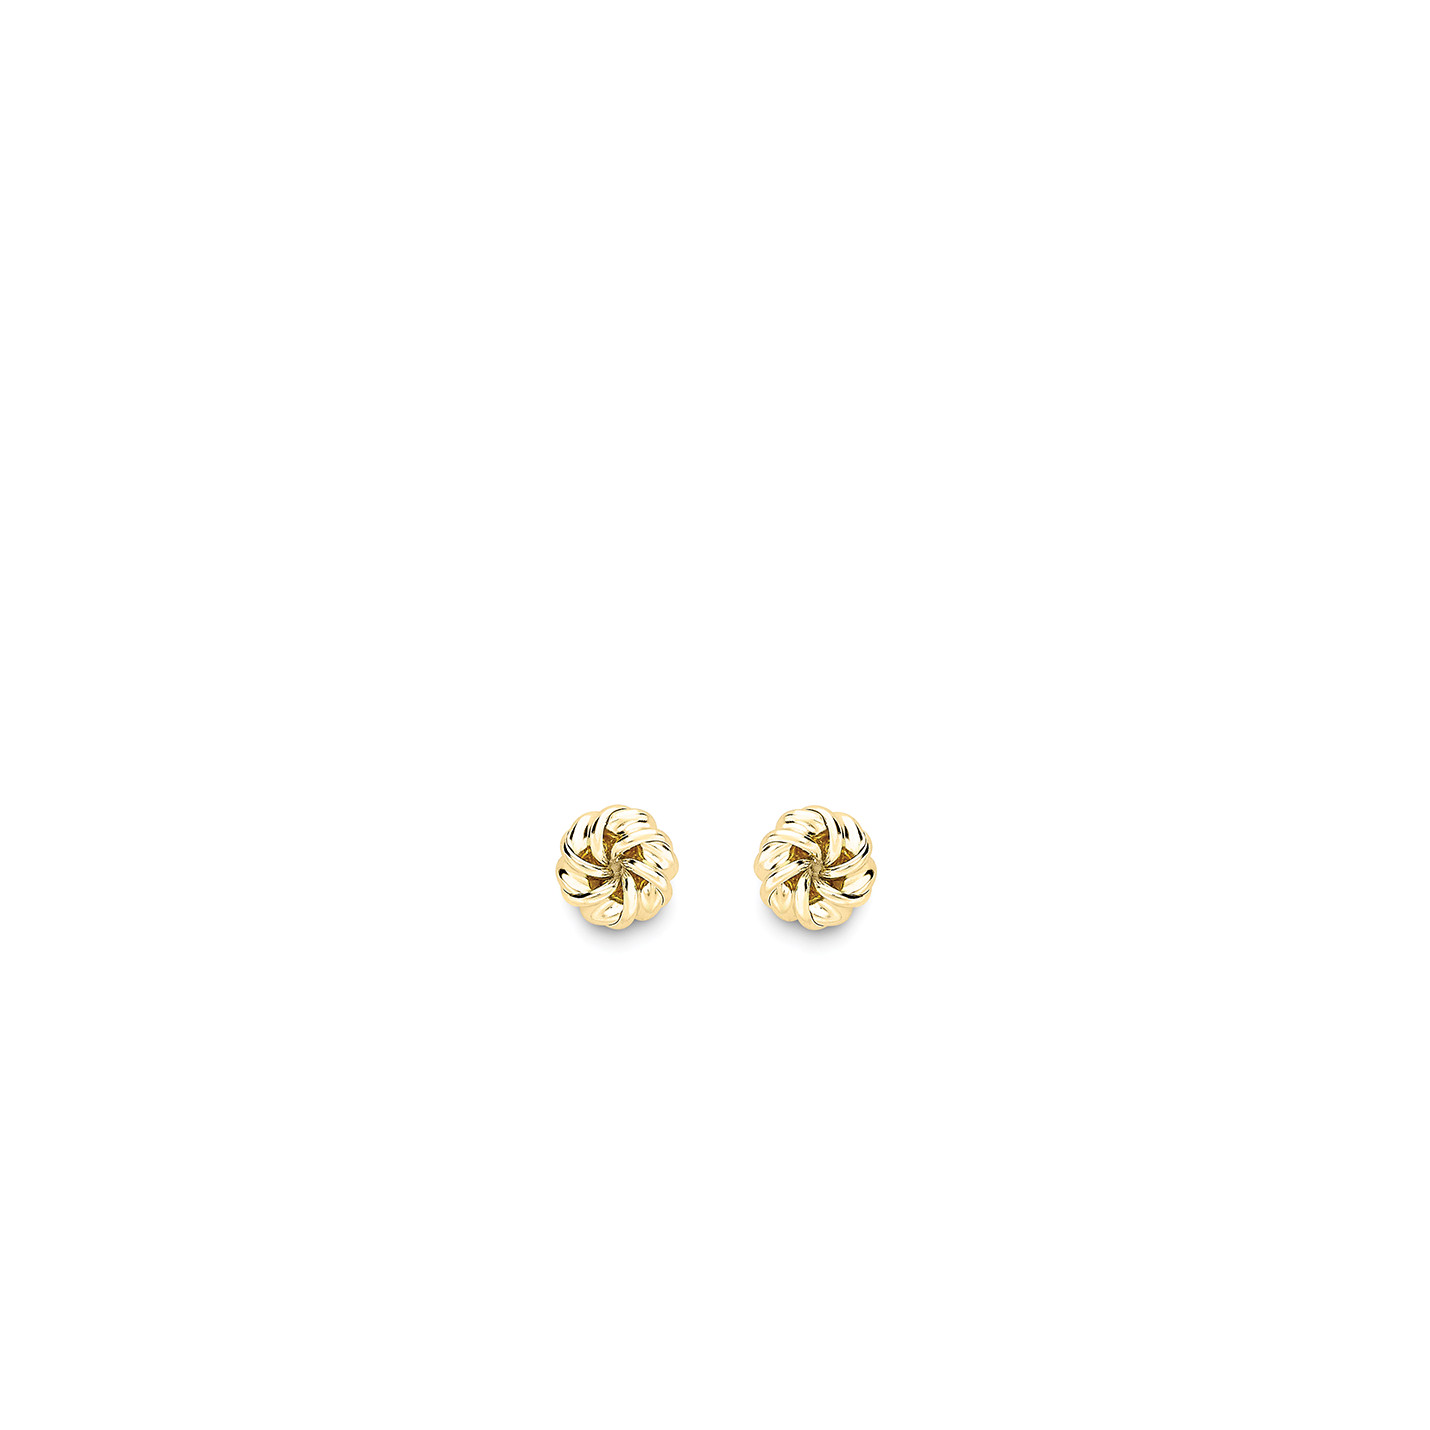 9ct. Gold Twisted Knot Stud Earrings